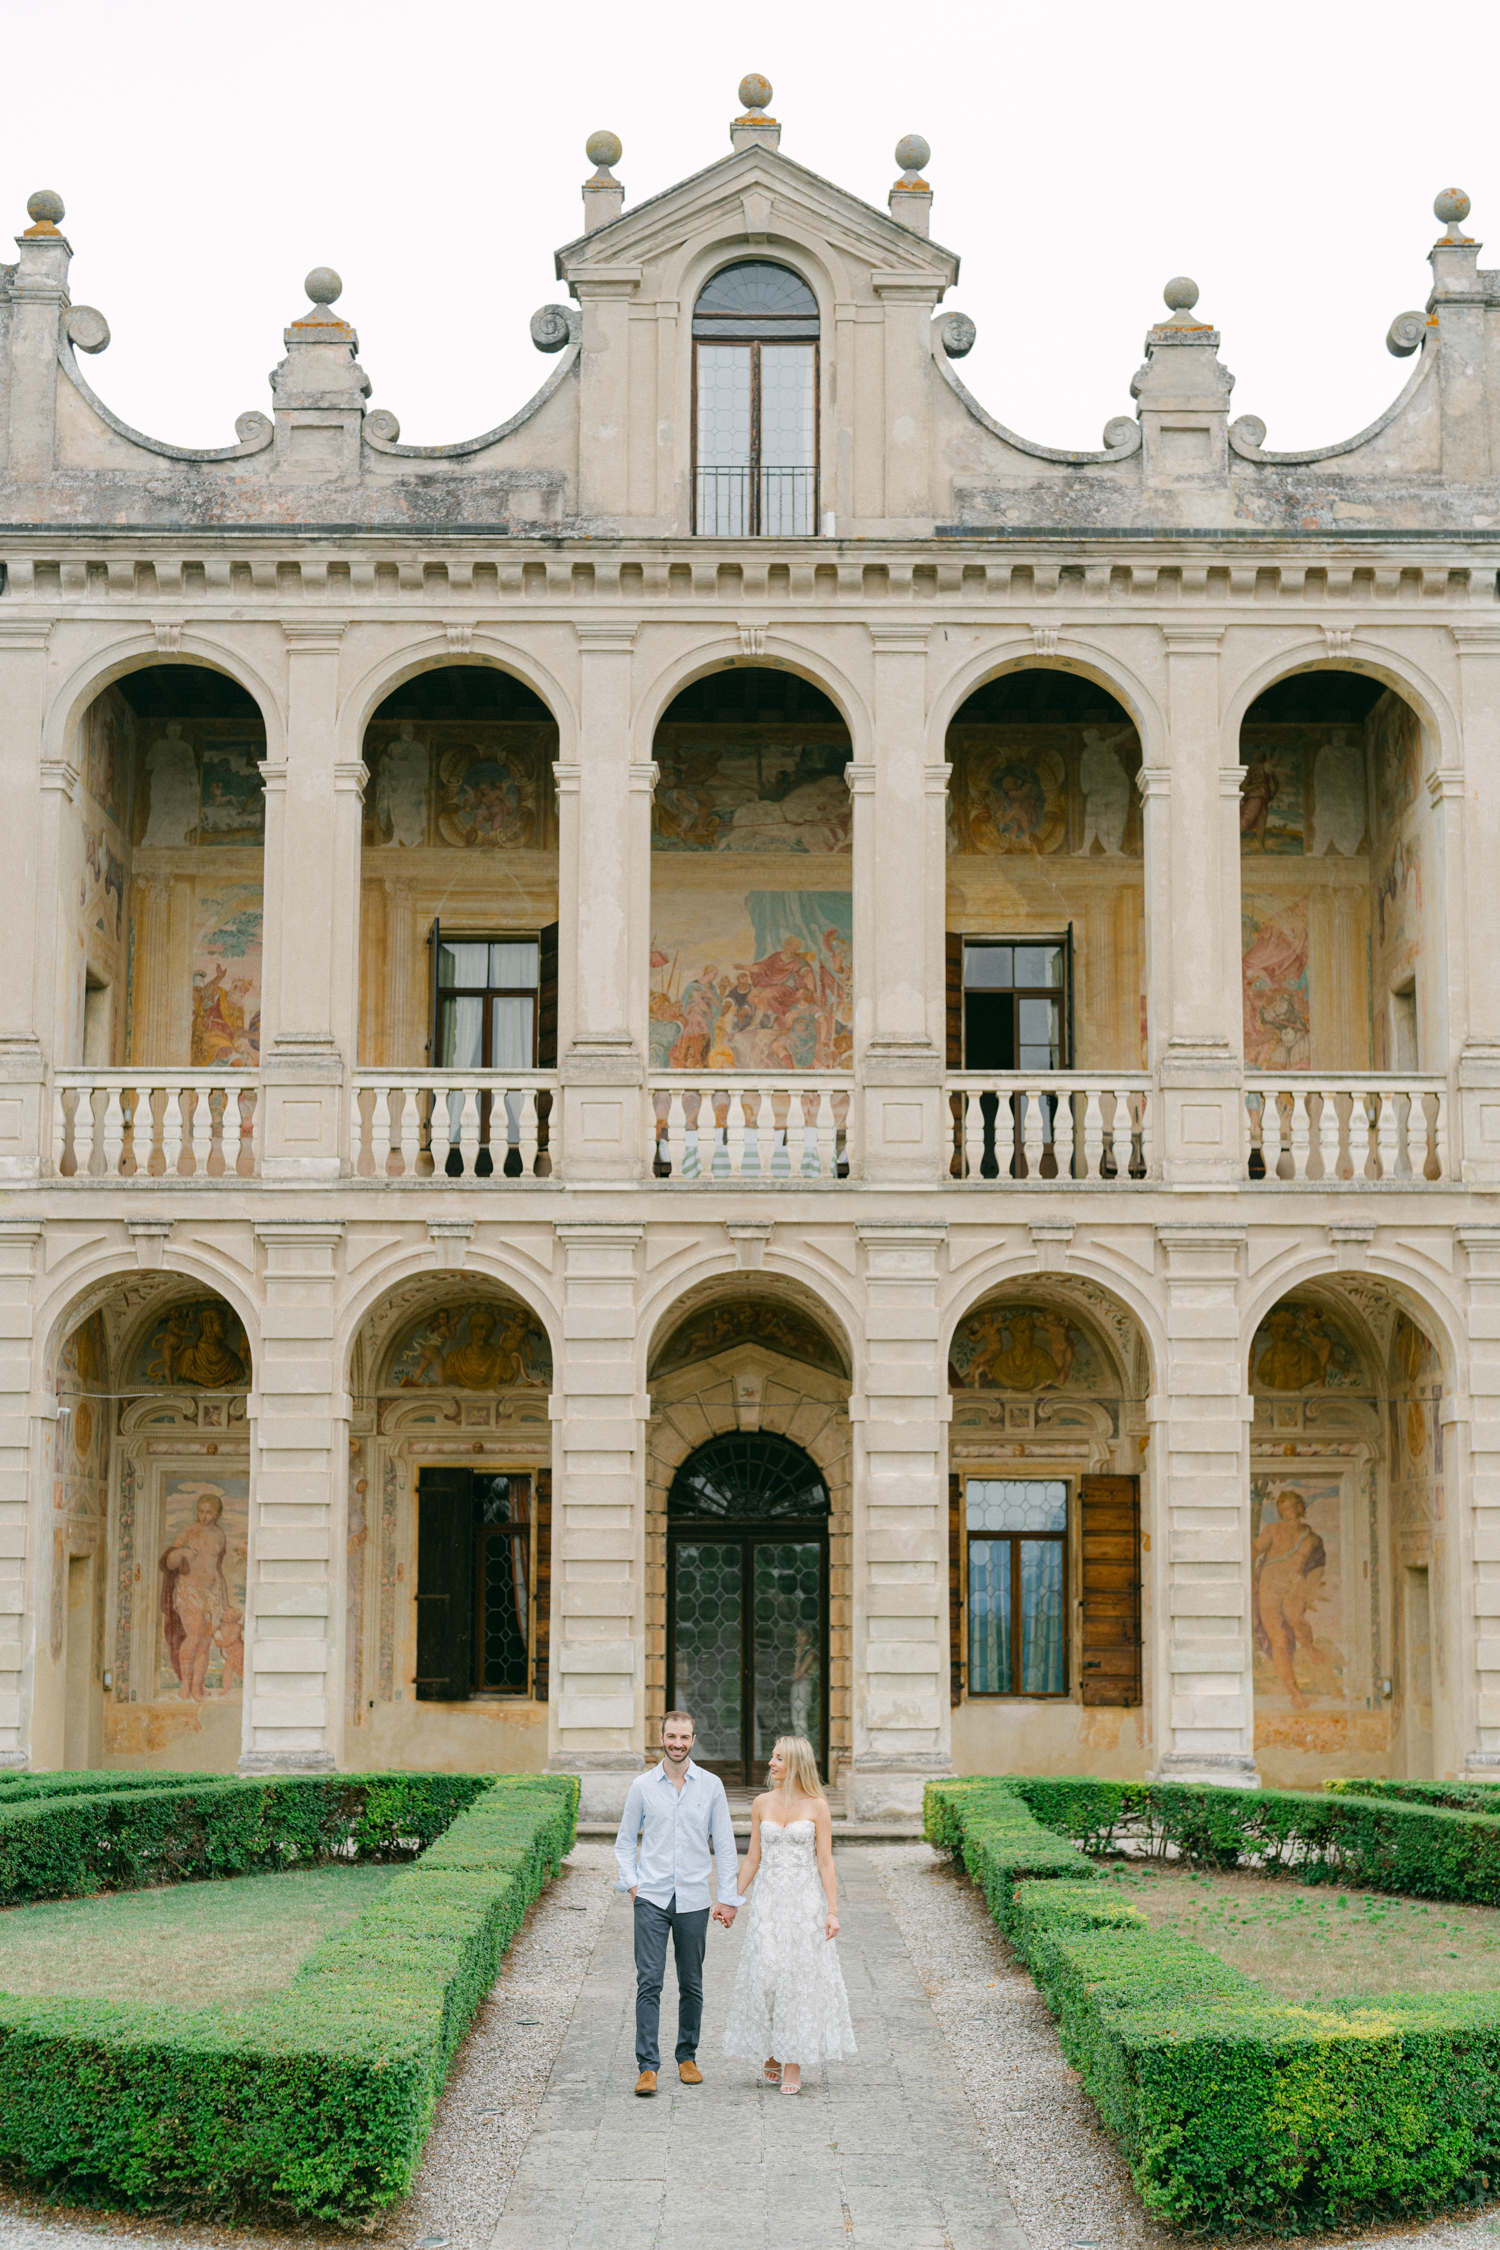 Villa Emo Capodilista is an Italian villa a few minutes away from Padua and one hour drive from Venice. Book your Venice and Padova wedding photographer for a romanic photoshoot or wedding in Italy.